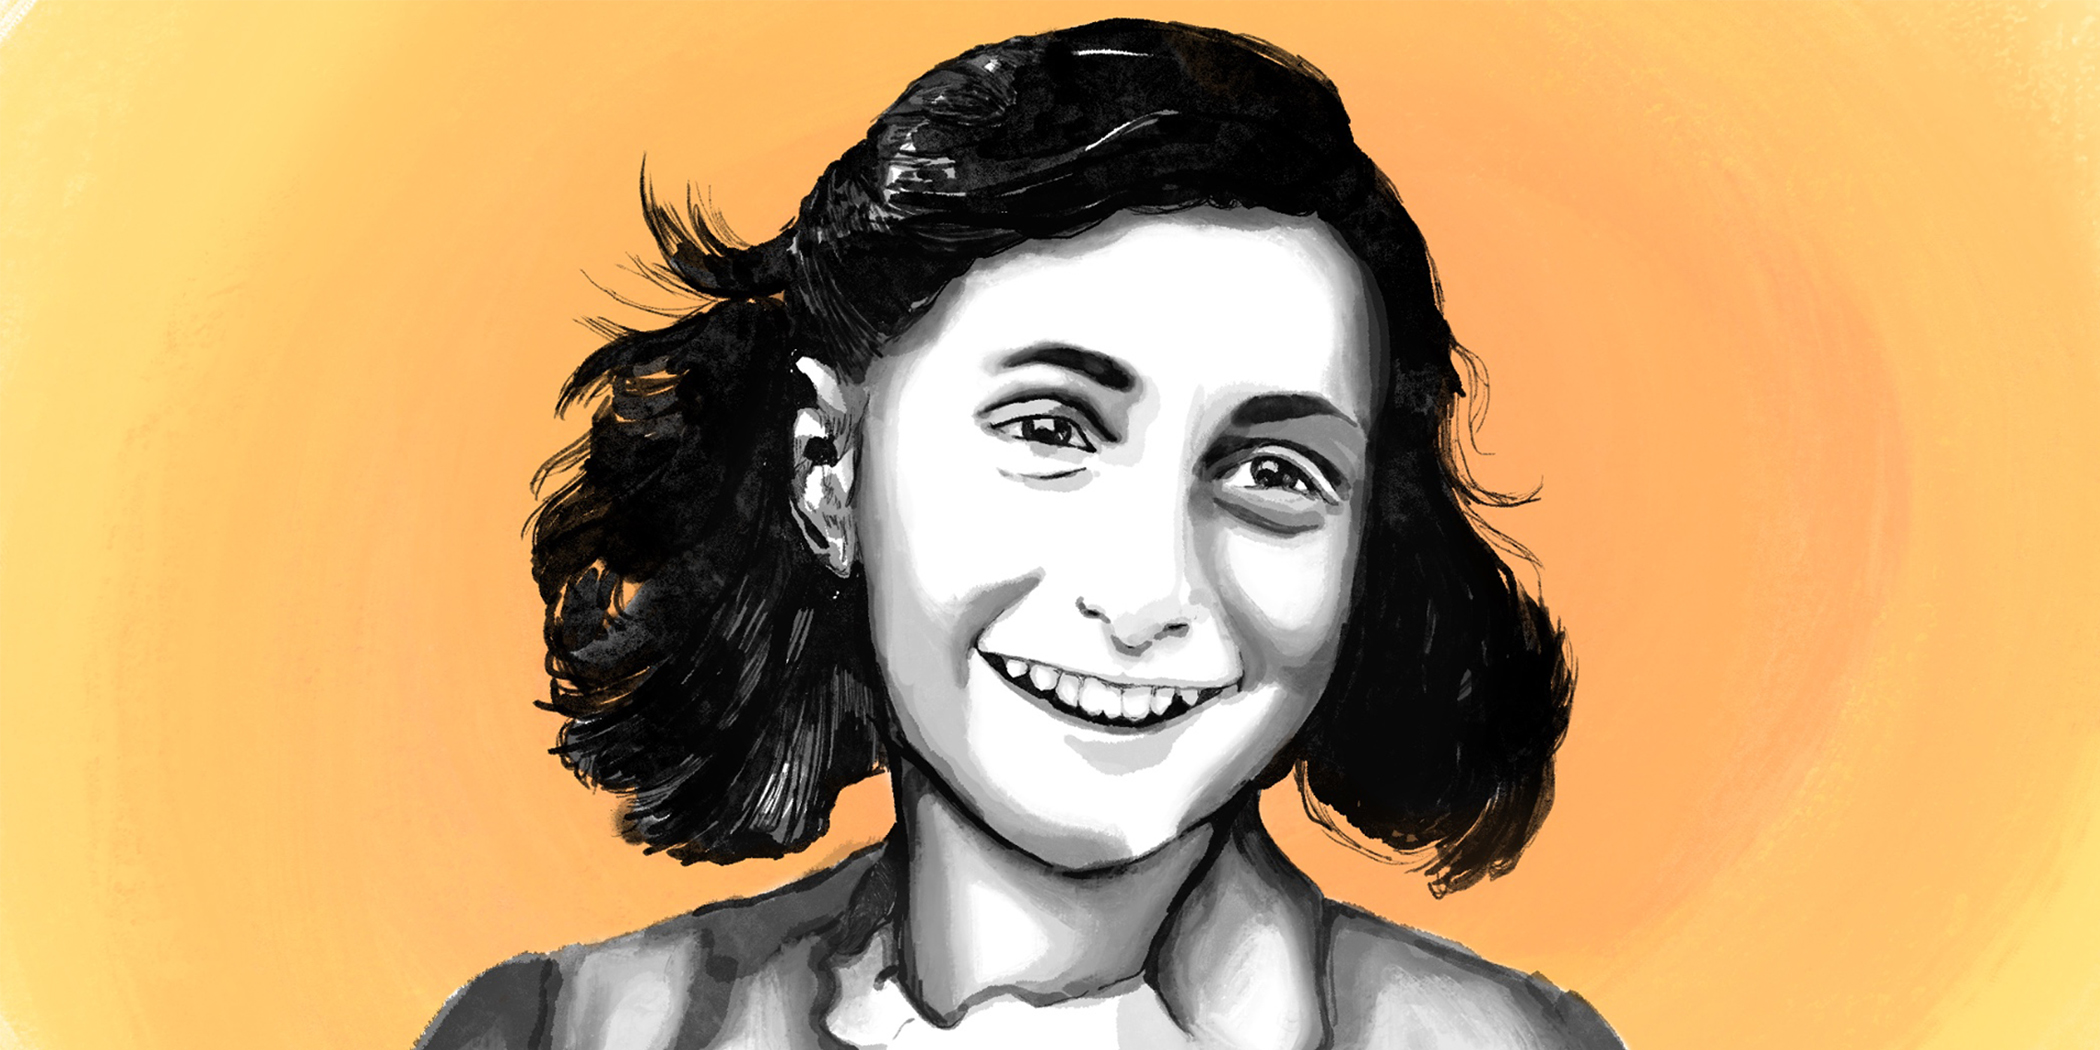 Anne Frank's back and white sketch with smiley face on a yellow background indicating finding our true self.